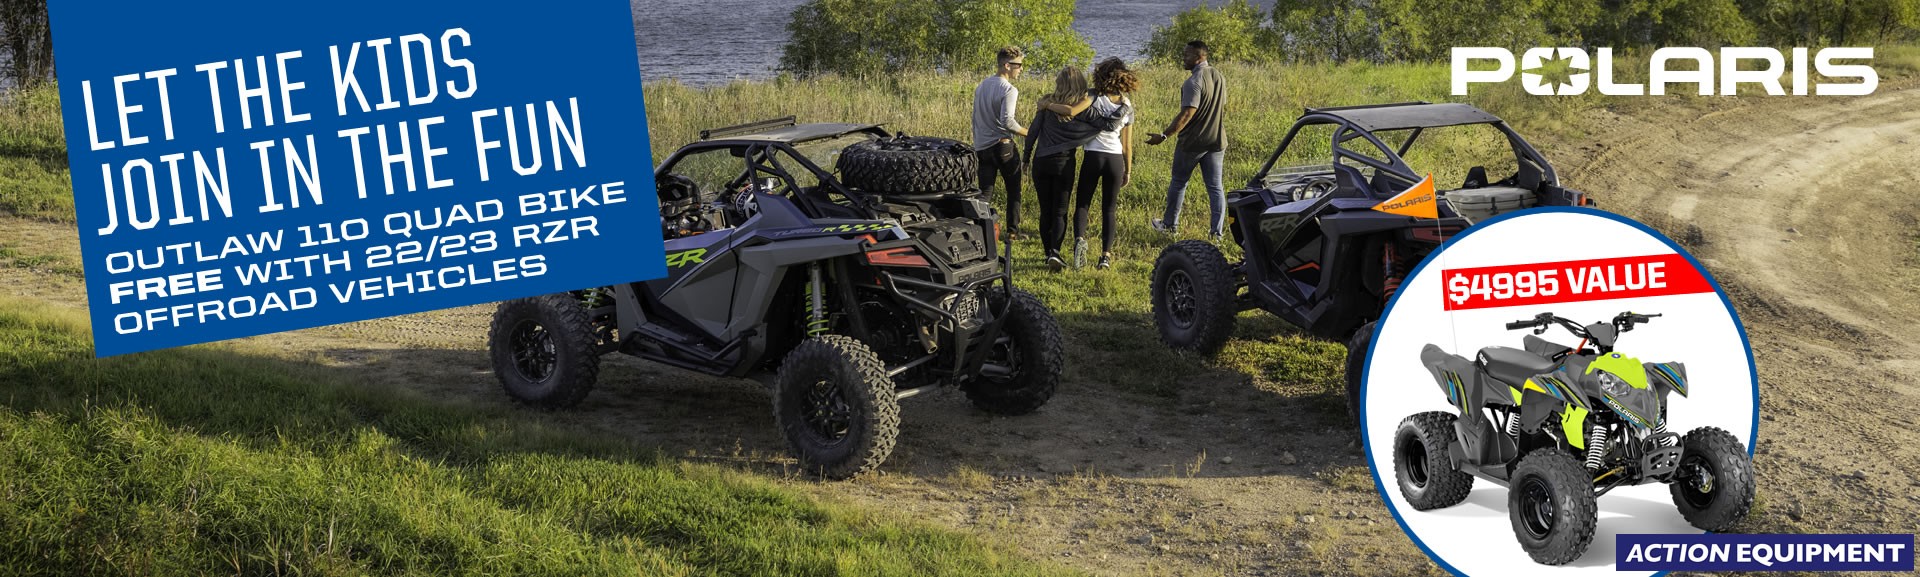 Polaris Outlaw 110 FREE with selected RZR models